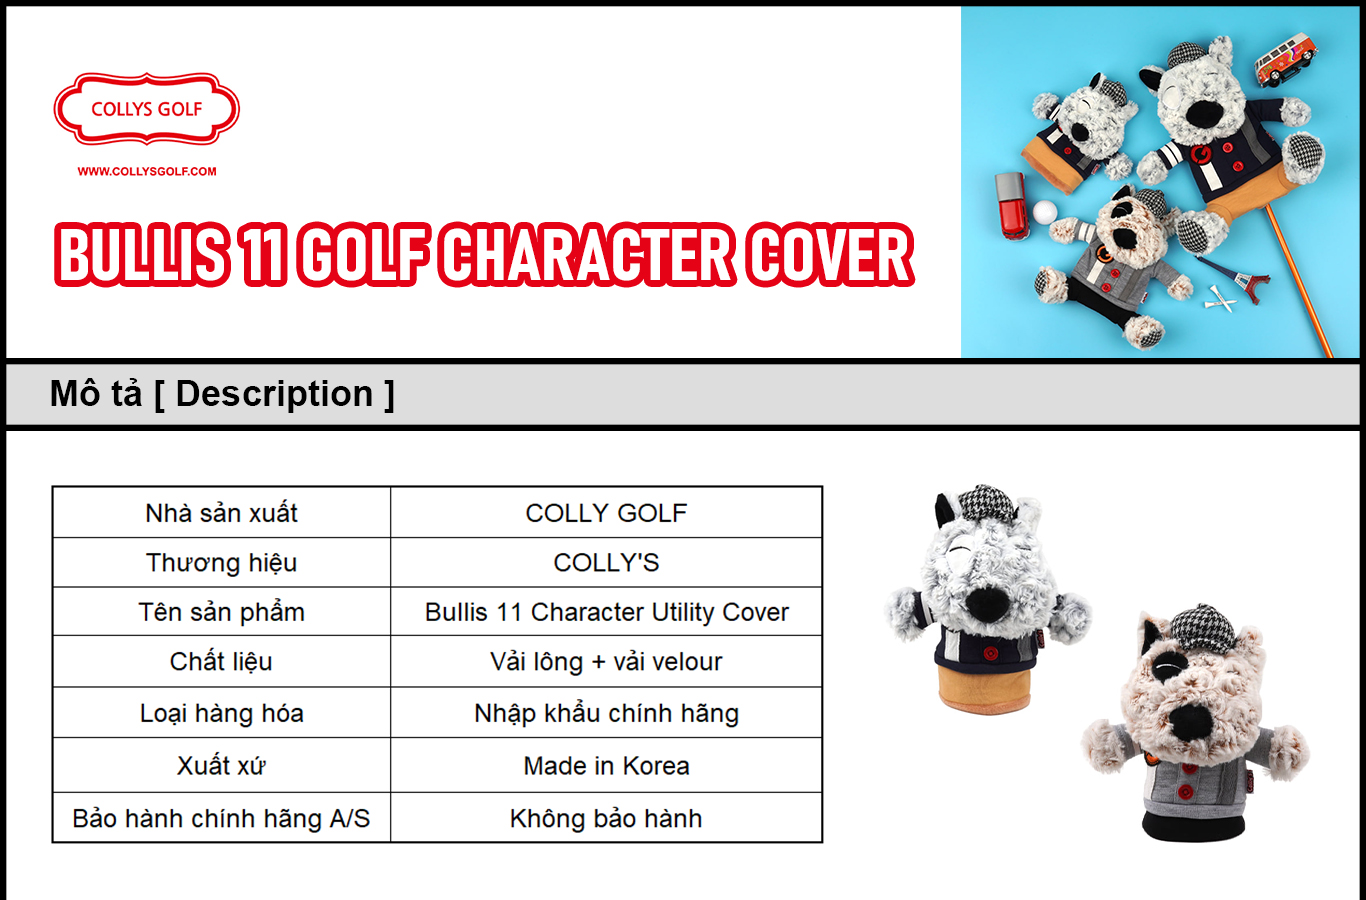 collys_bullis_11_golf_character_utility_cover_1